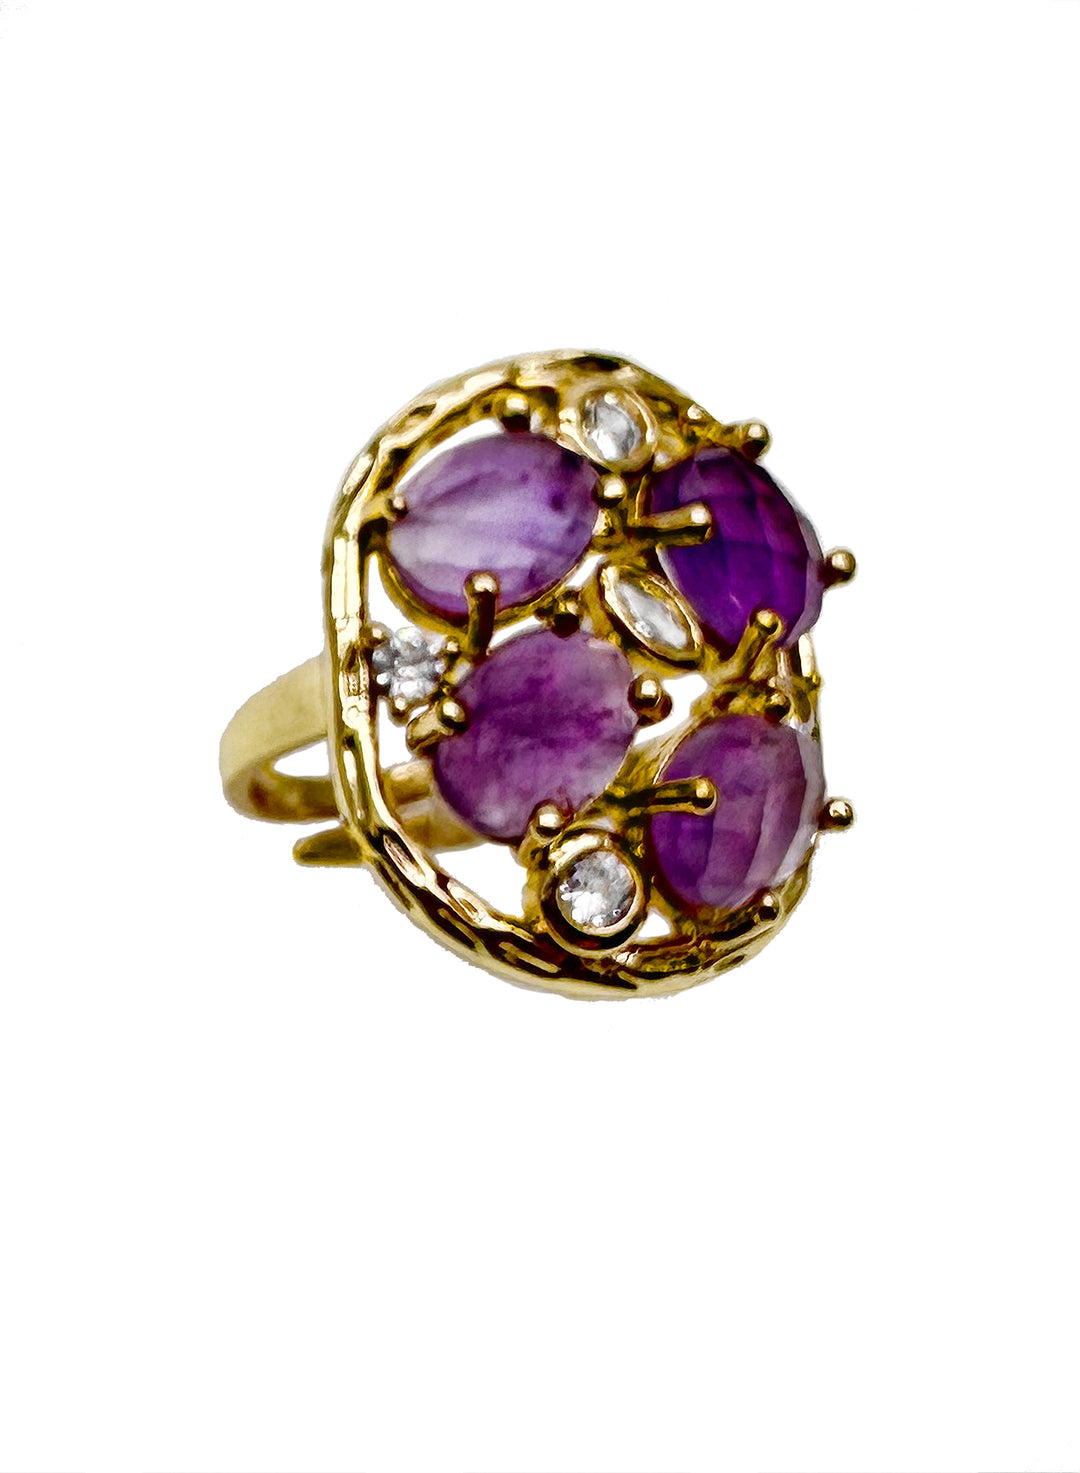 Introducing our exquisite Amethyst and Zircon Ring, model KR006 – a mesmerizing blend of elegance and charm.